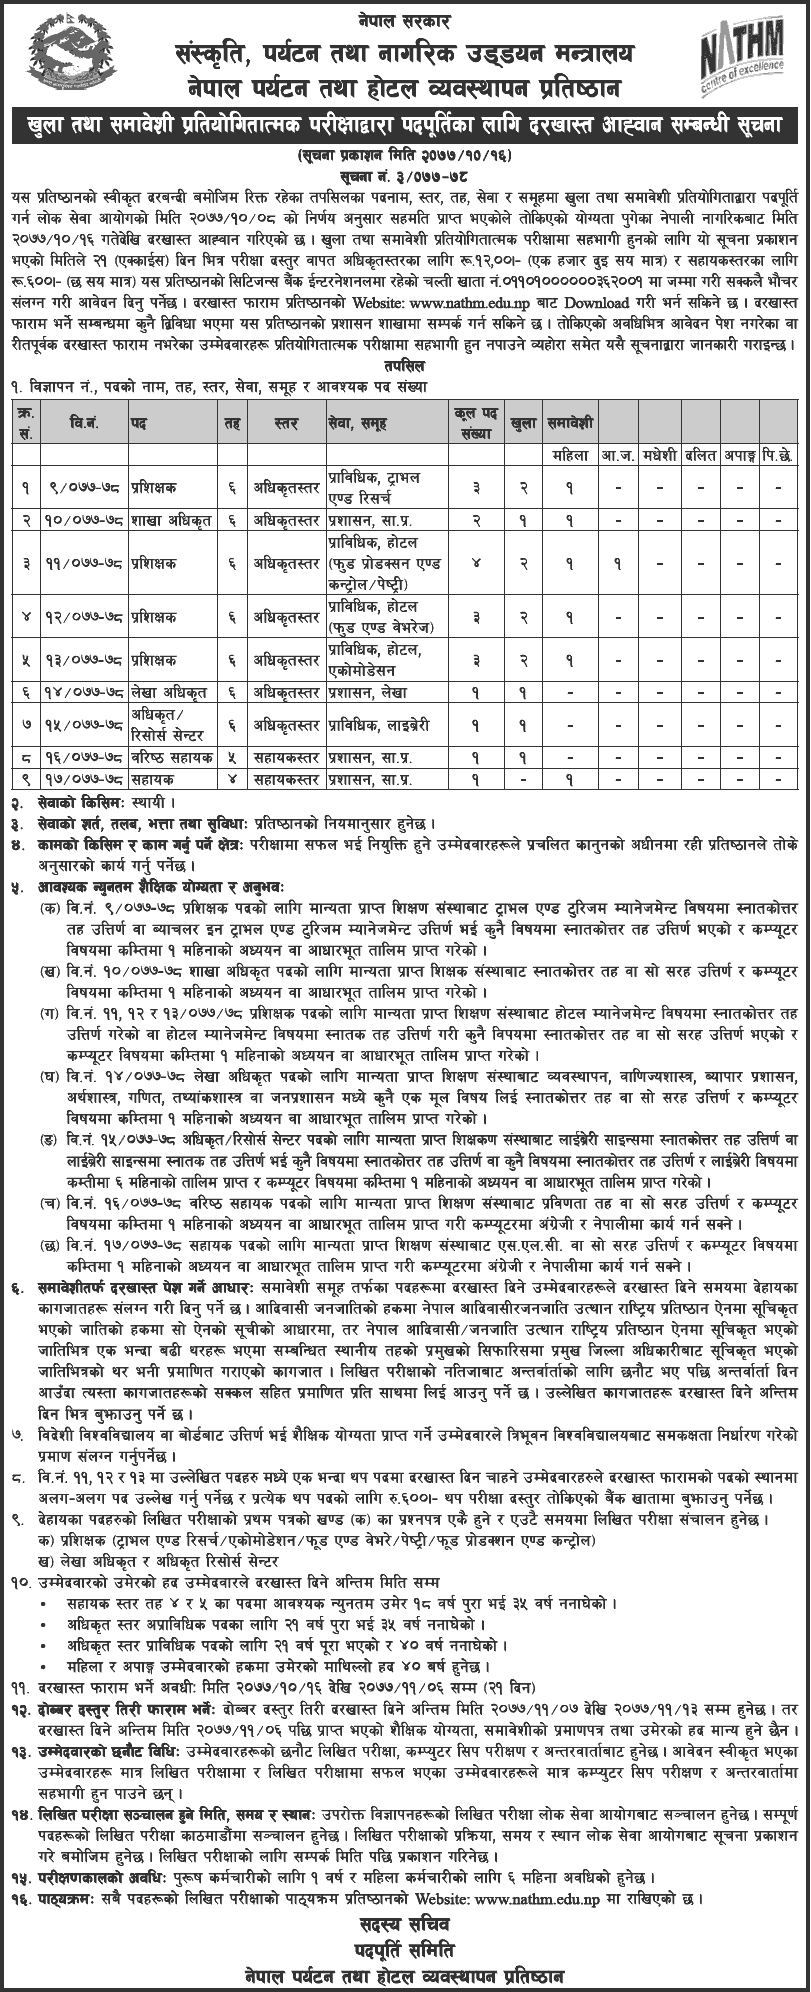 Nepal Academy of Tourism and Hotel Management (NATHM) Vacancy 2077